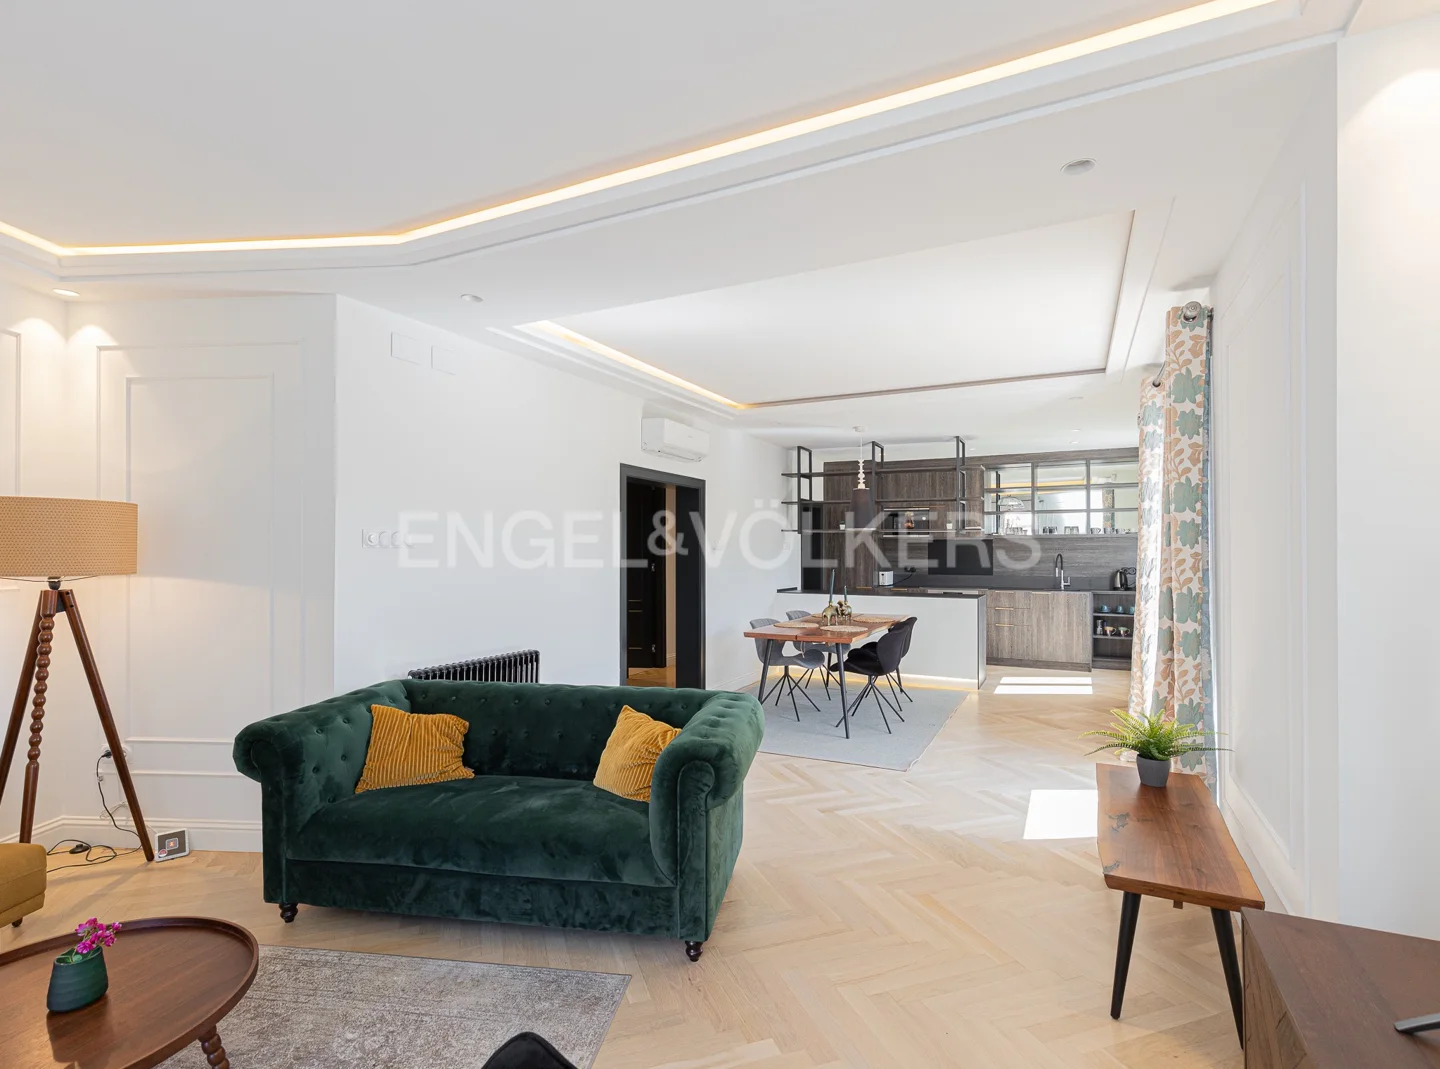 Exclusive apartment in a pedestrian area and views of the Sagrada Familia